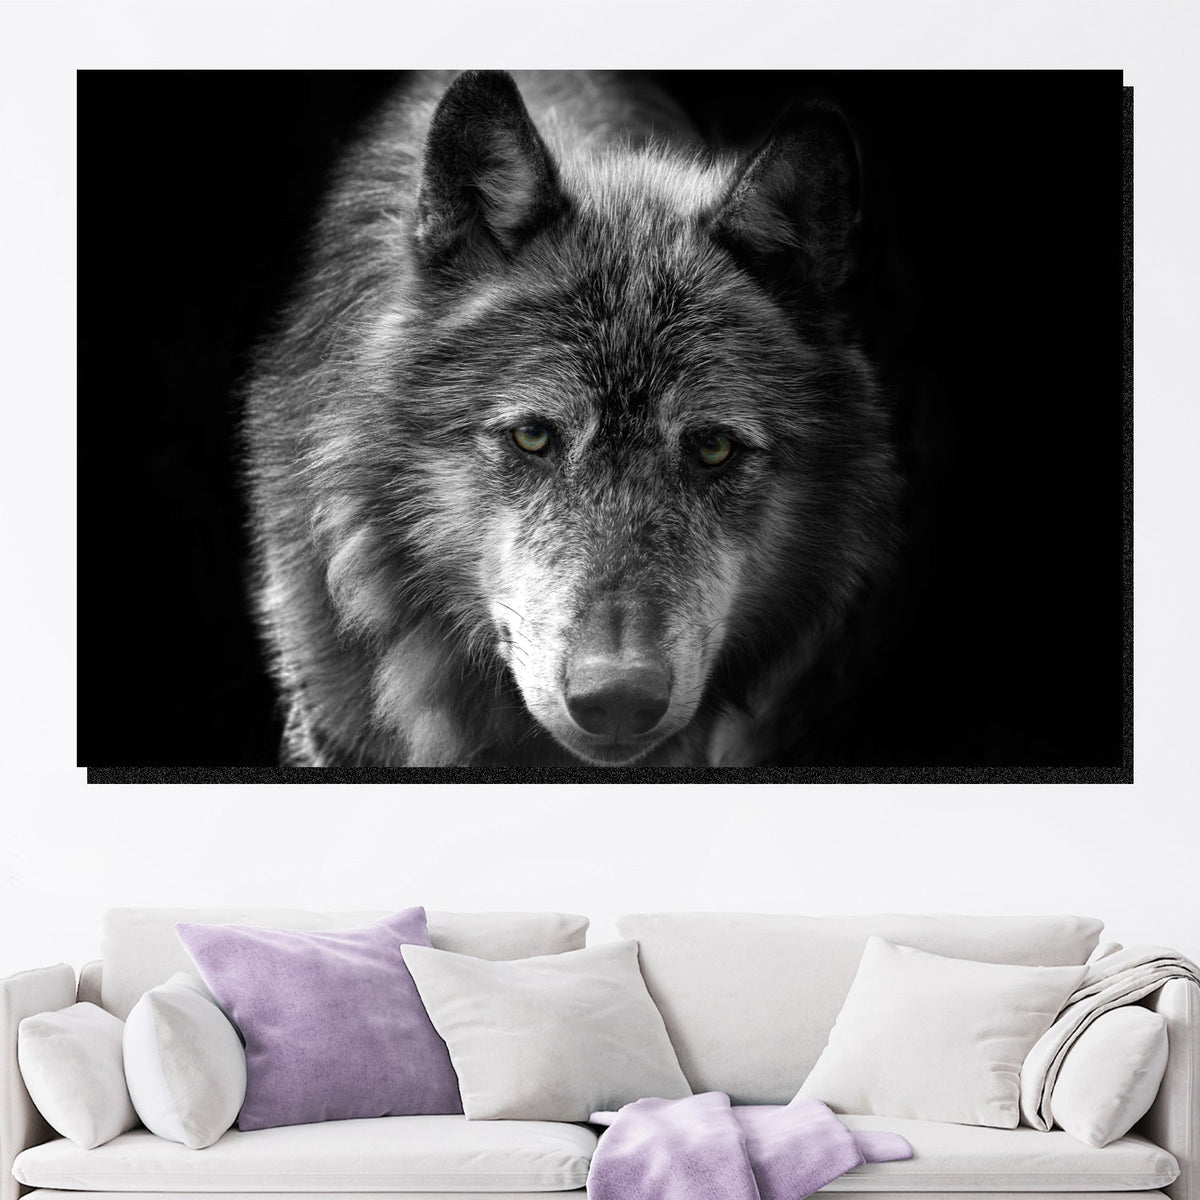 https://cdn.shopify.com/s/files/1/0387/9986/8044/products/IberianWolfCanvasArtprintStretched-2.jpg